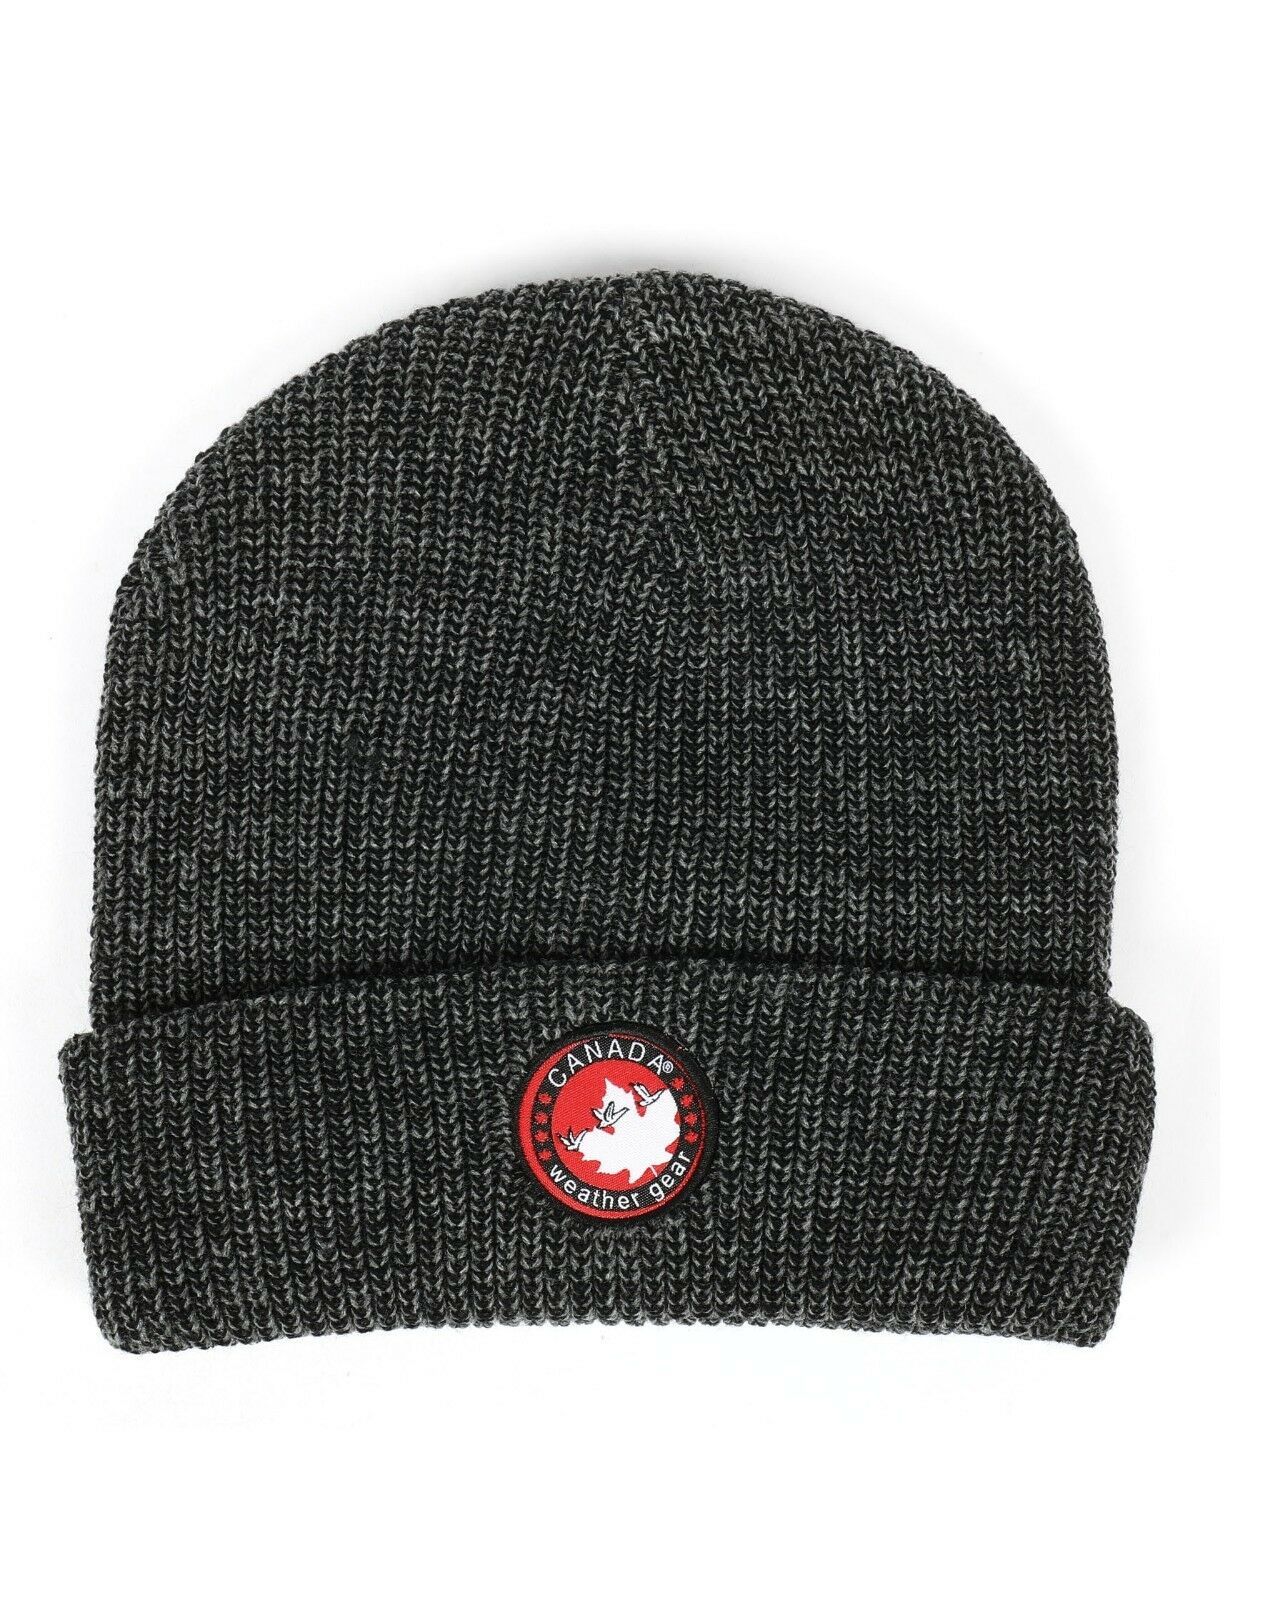 Canada Weather Gear Marled Knit Cuffed Beanie Style Winter Hat Gray Toque